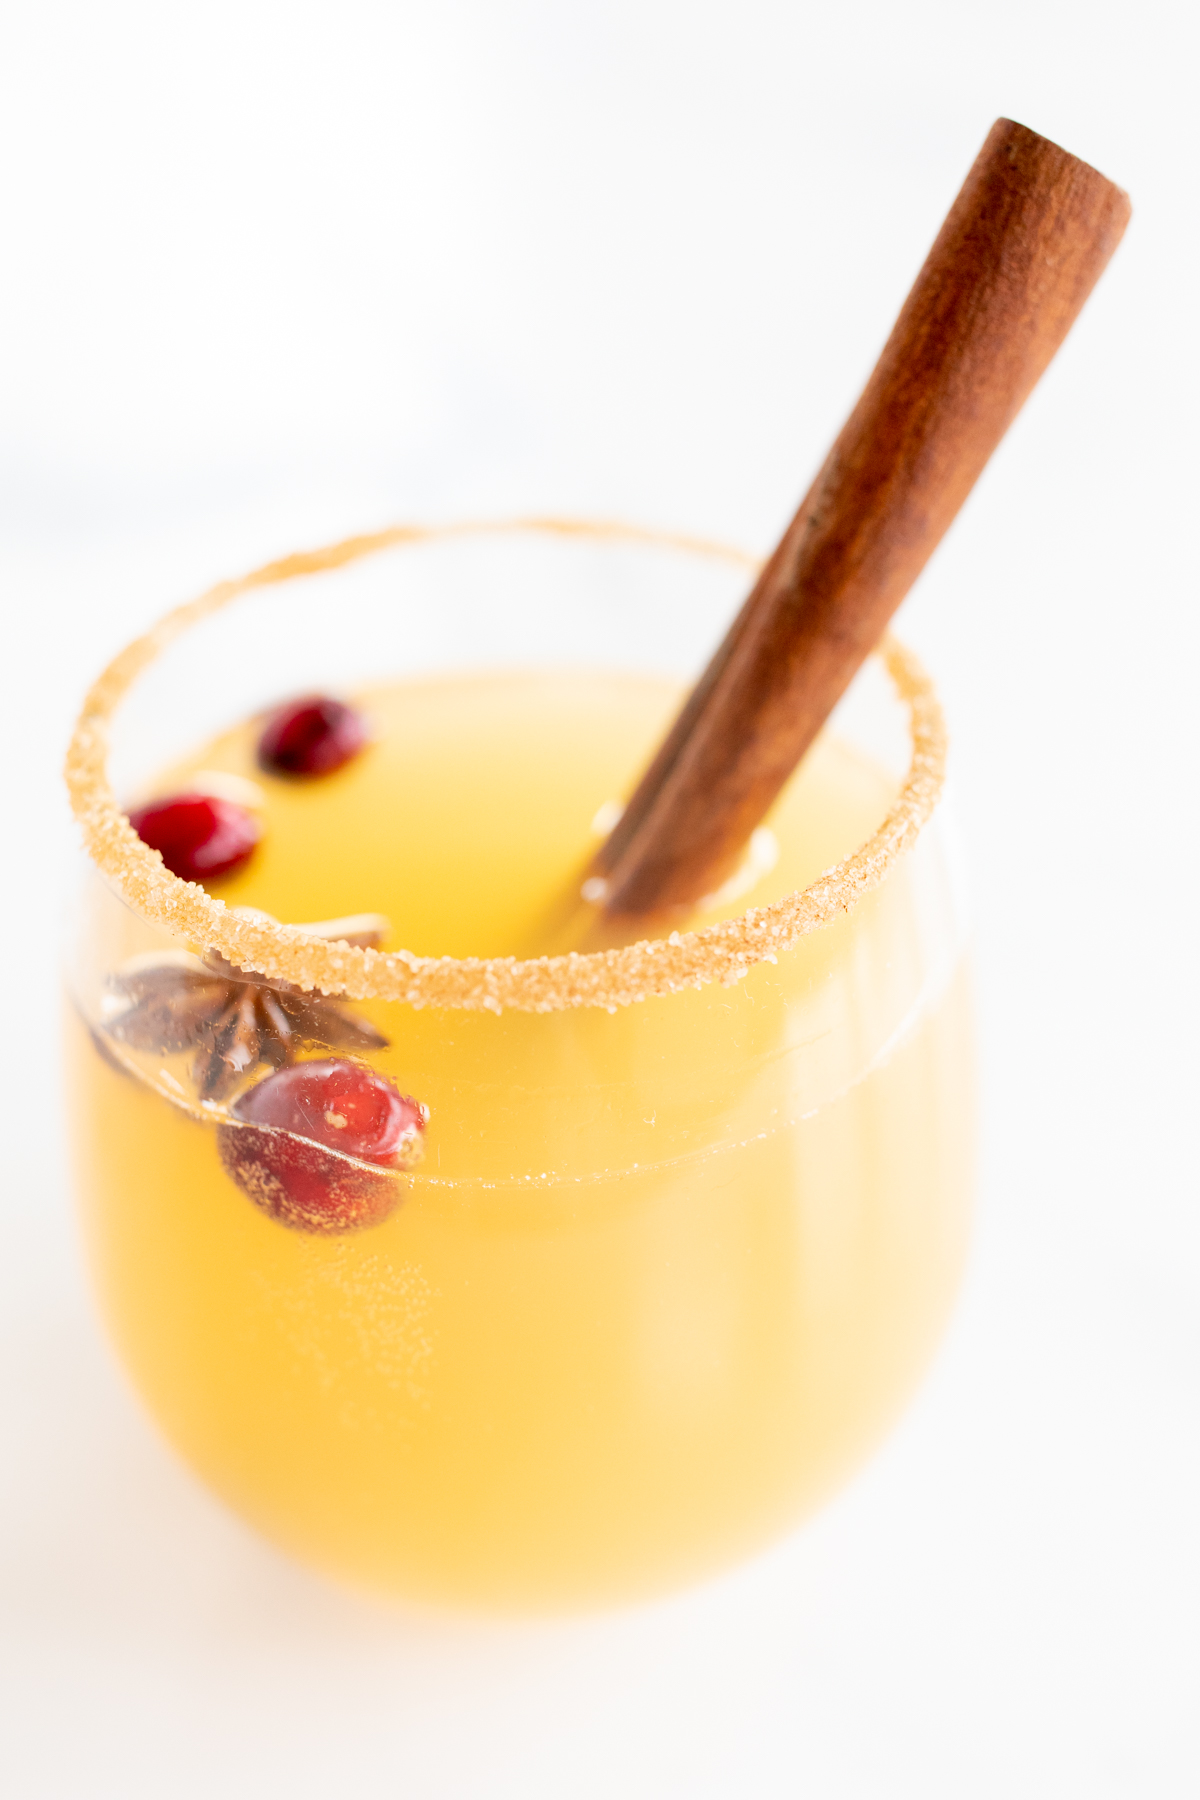 A clear glass of apple cider sangria, garnished with a cinnamon stick.